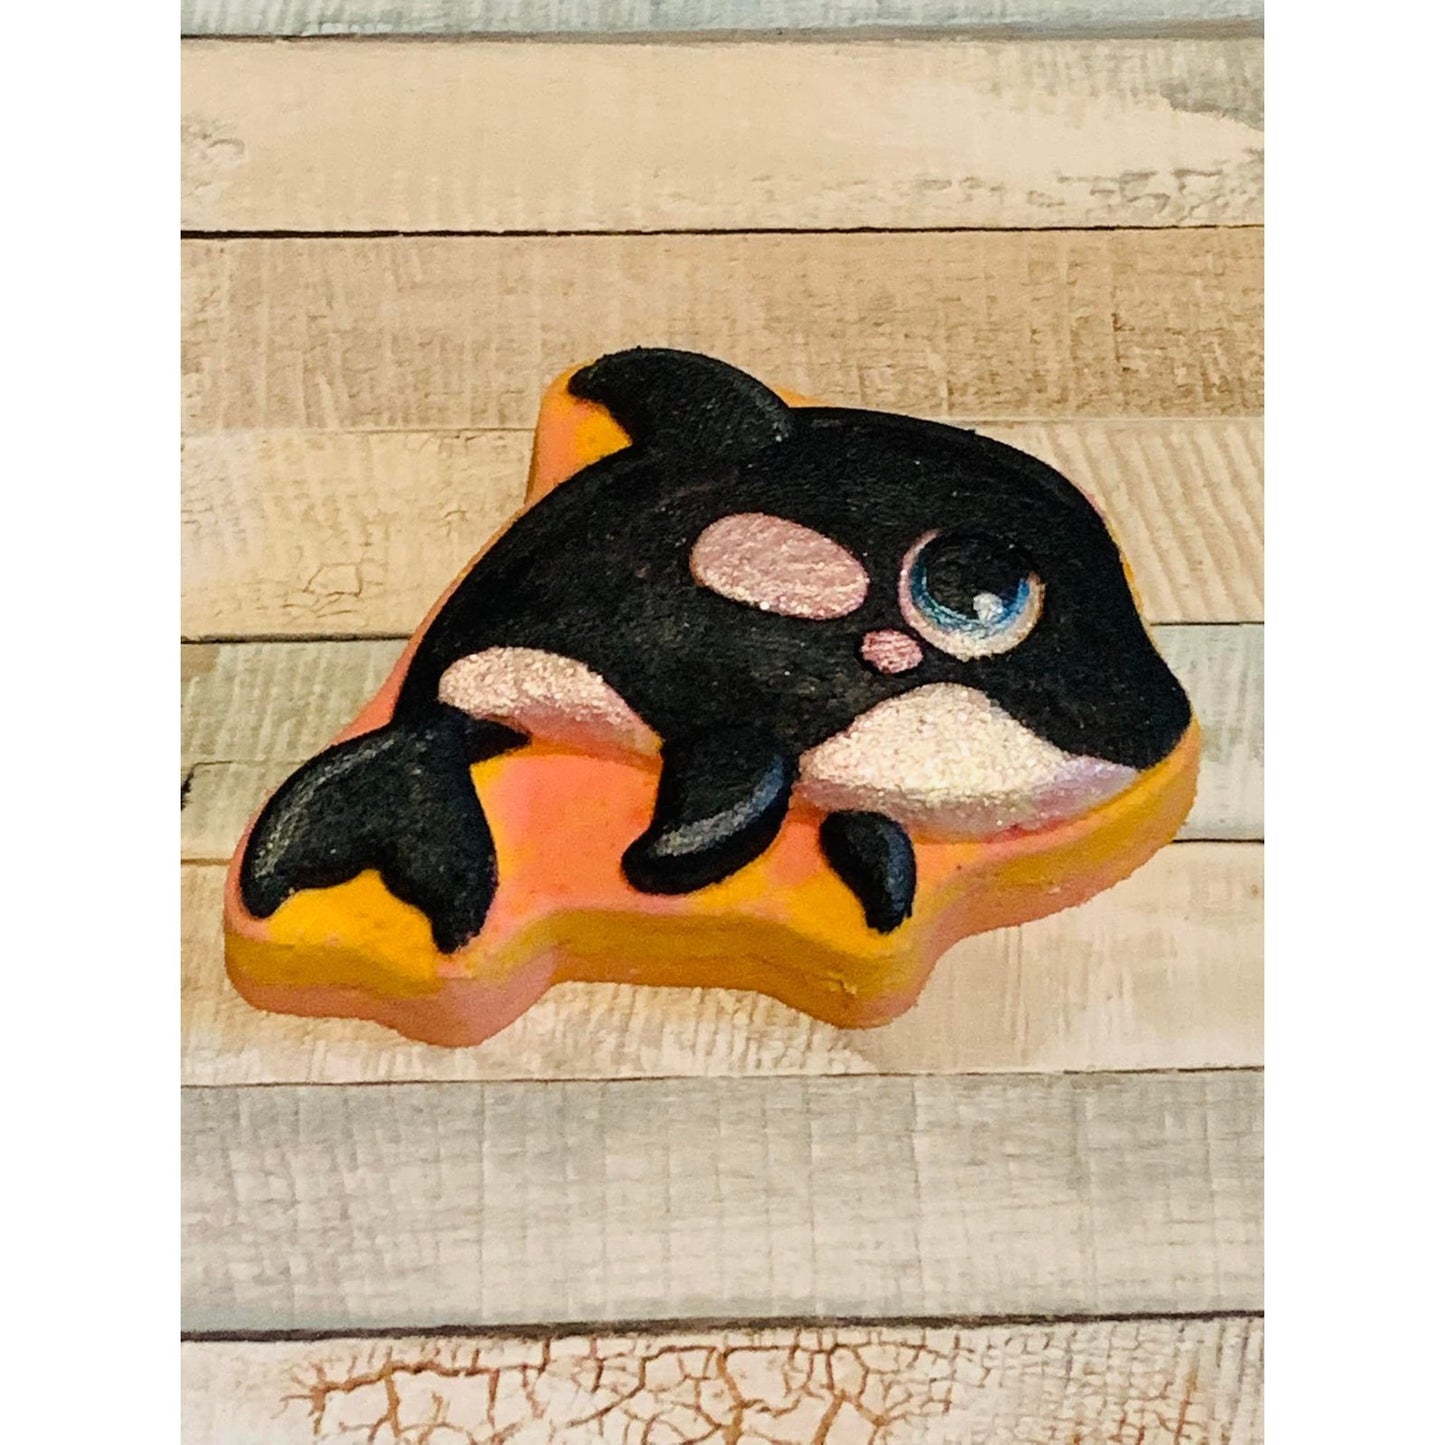 Orca (Whale) Mold Series